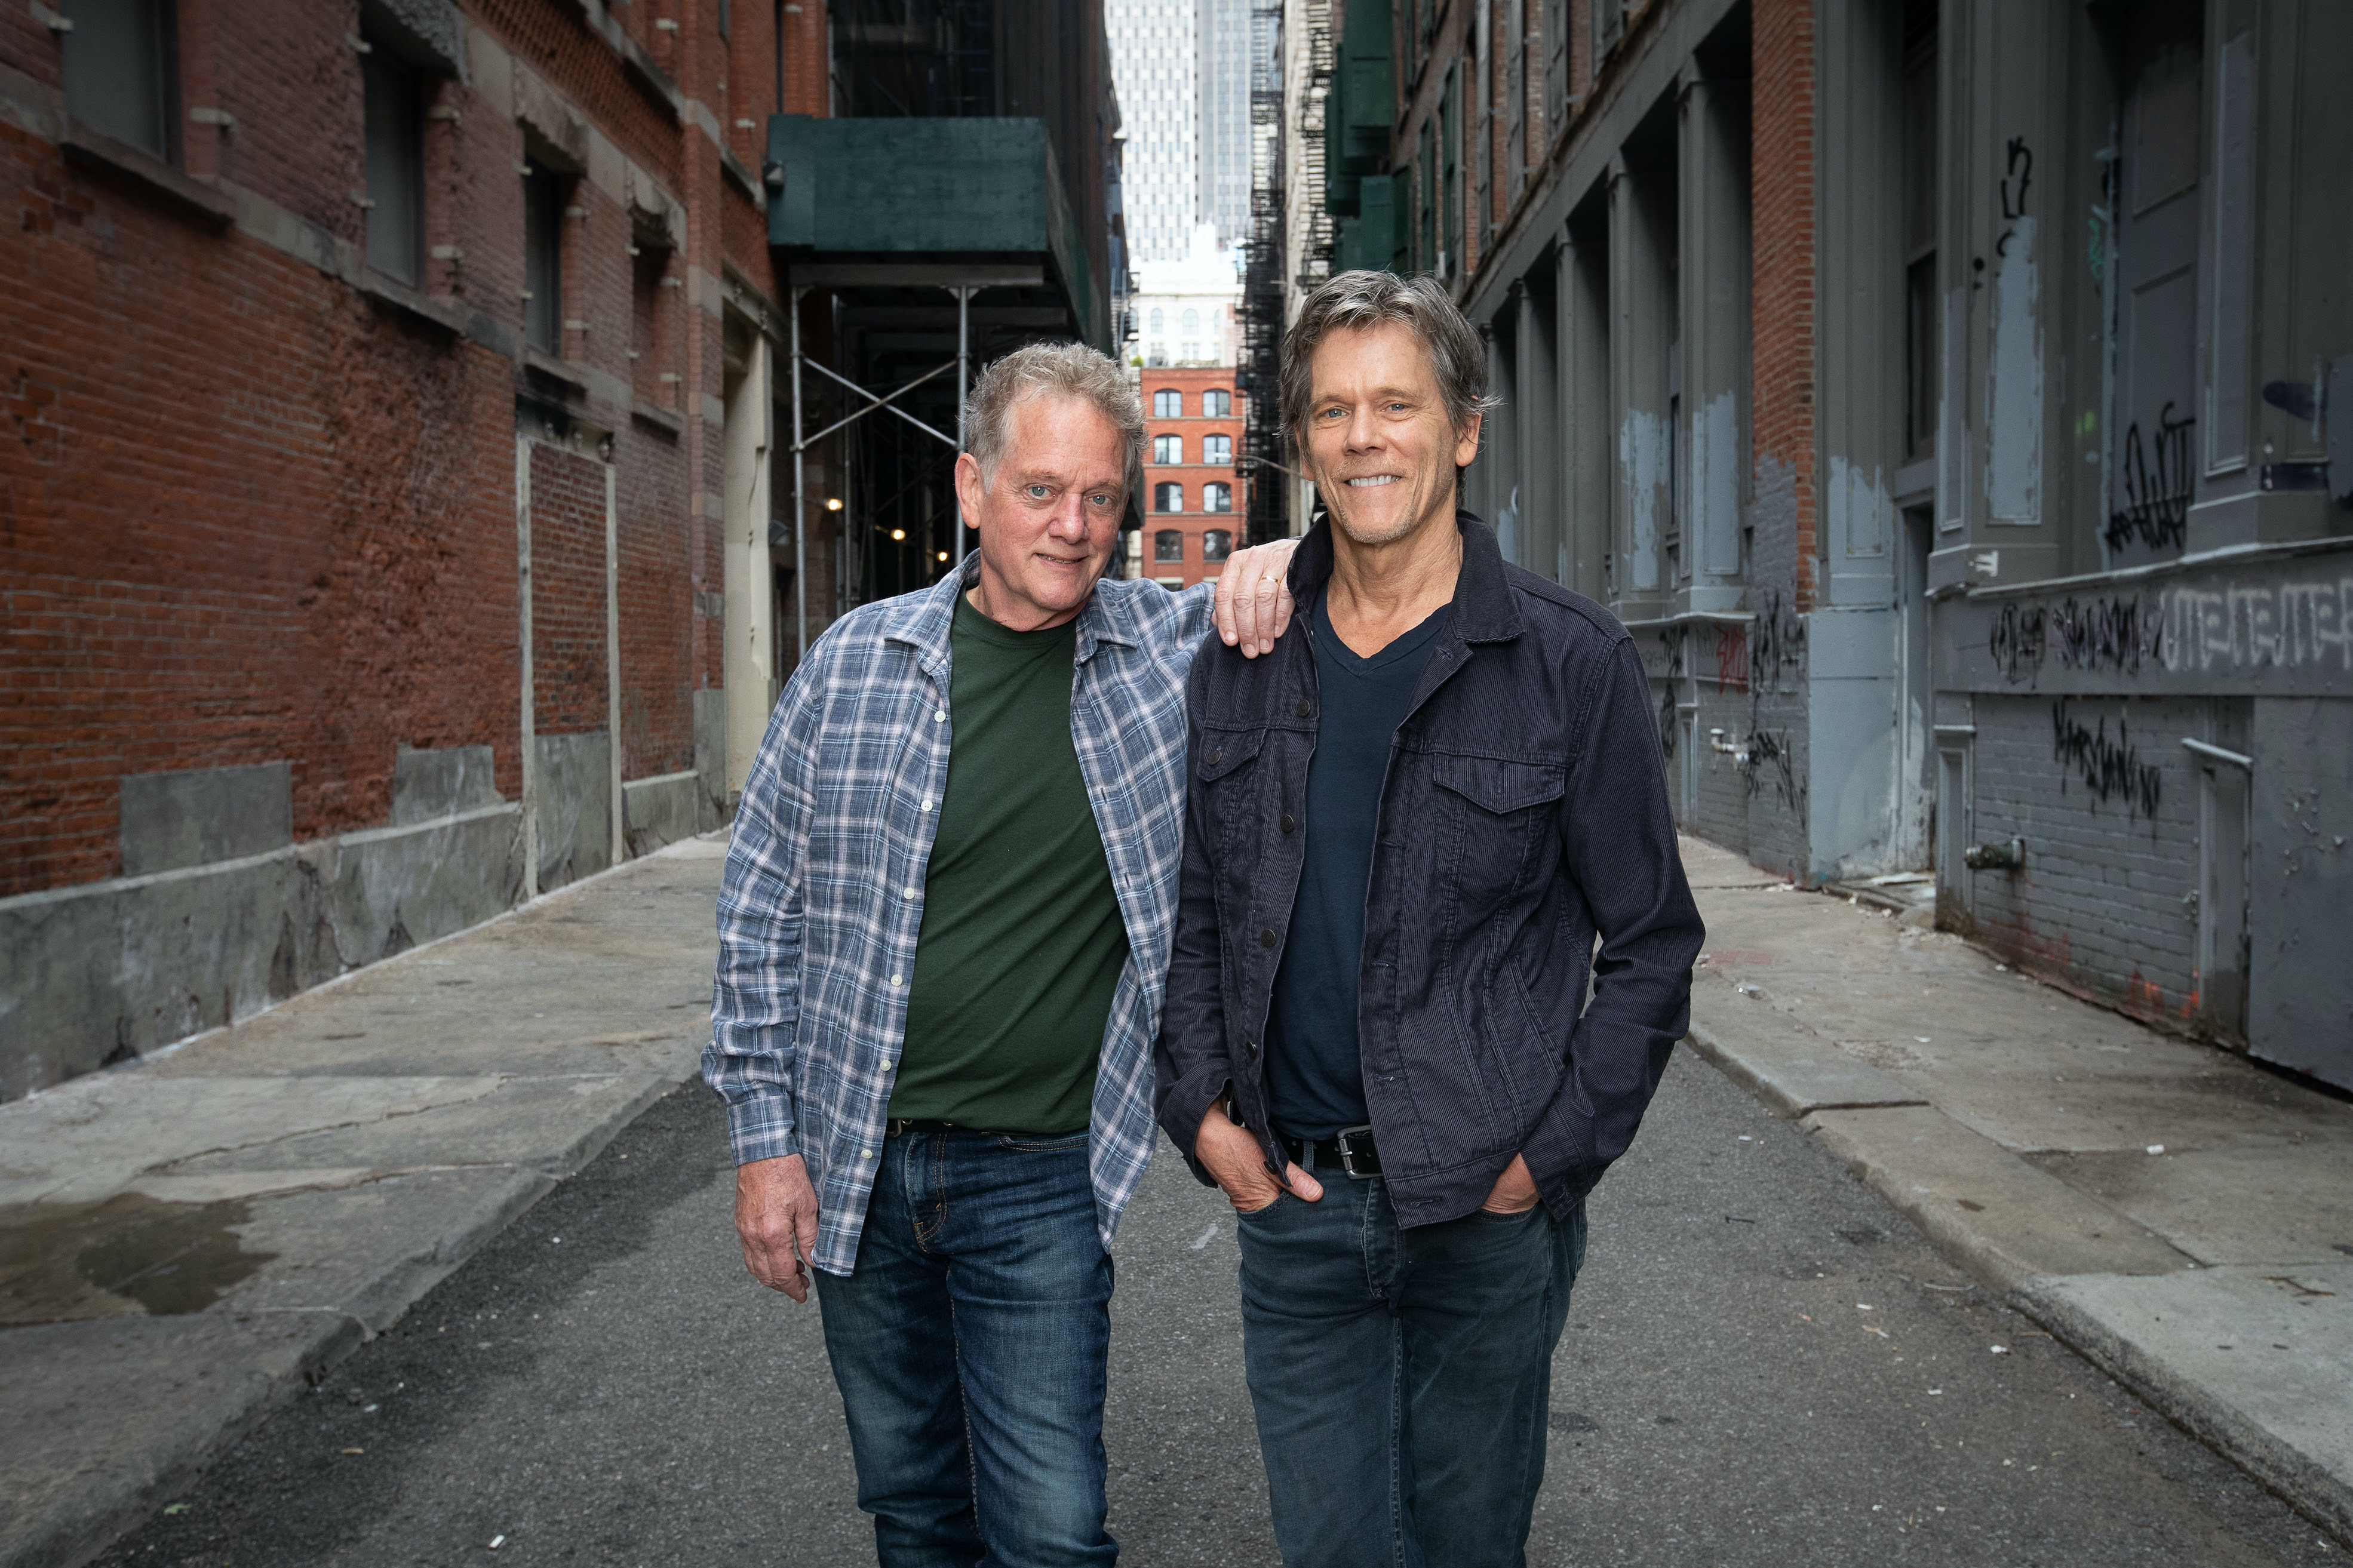 The Bacon Brothers Announce 'Out of Memory Tour' for April 2022